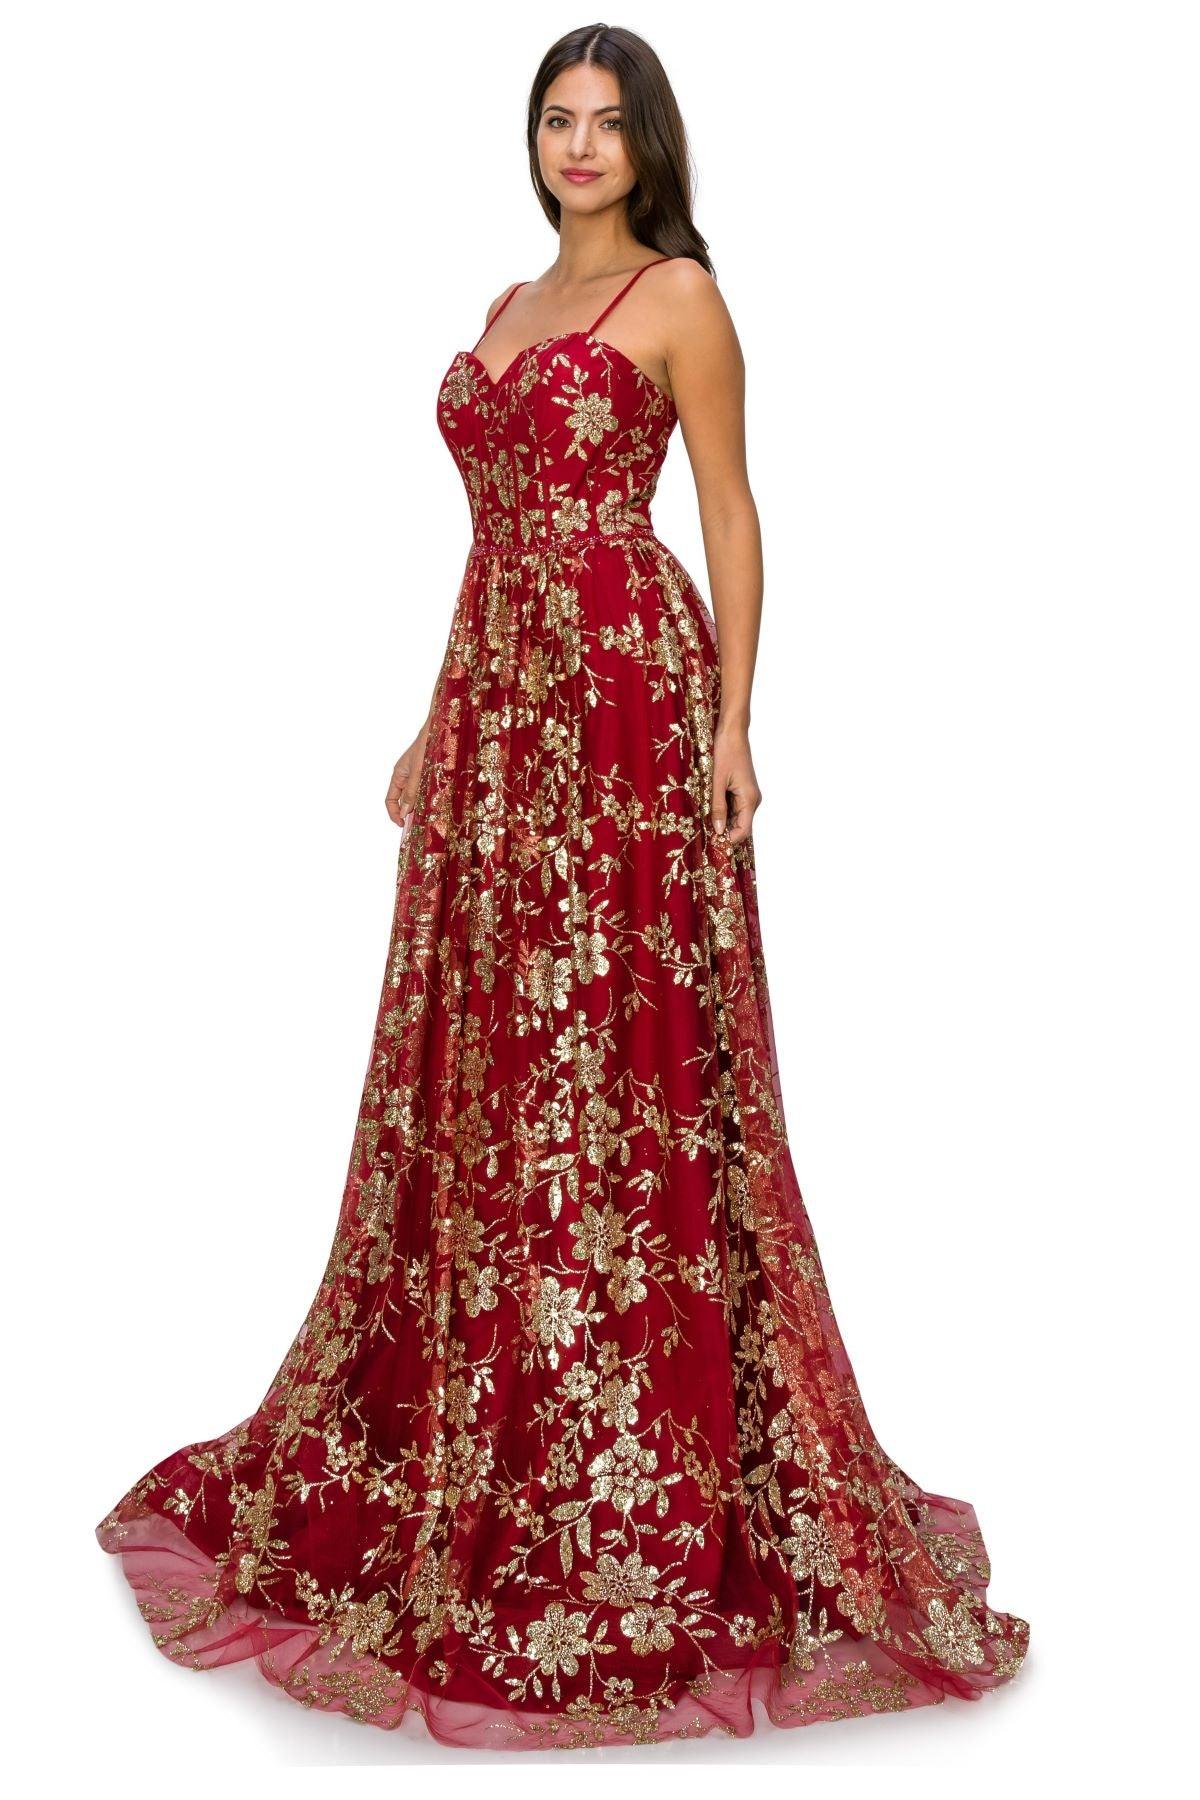 Cinderella Couture CC8043J Strapless Glittered Print A Line Gown Burgundy